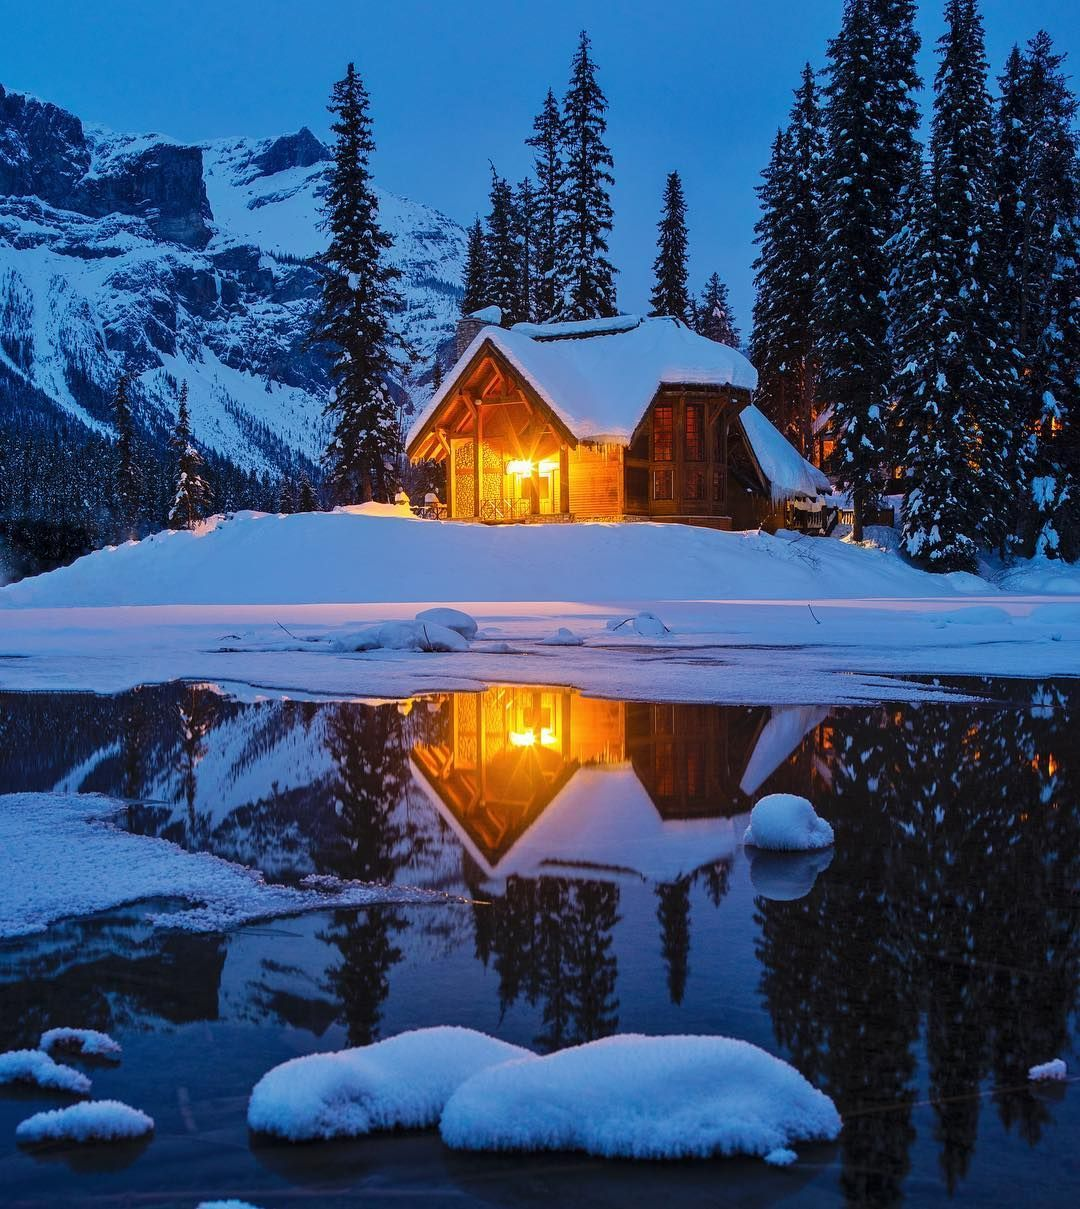 Nighttime color photo of a 2 story house in a snowy and mountainous wilderness with a lake in the foreground. The house is lit from inside with a beautiful golden glow that reflects on the water of the lake.